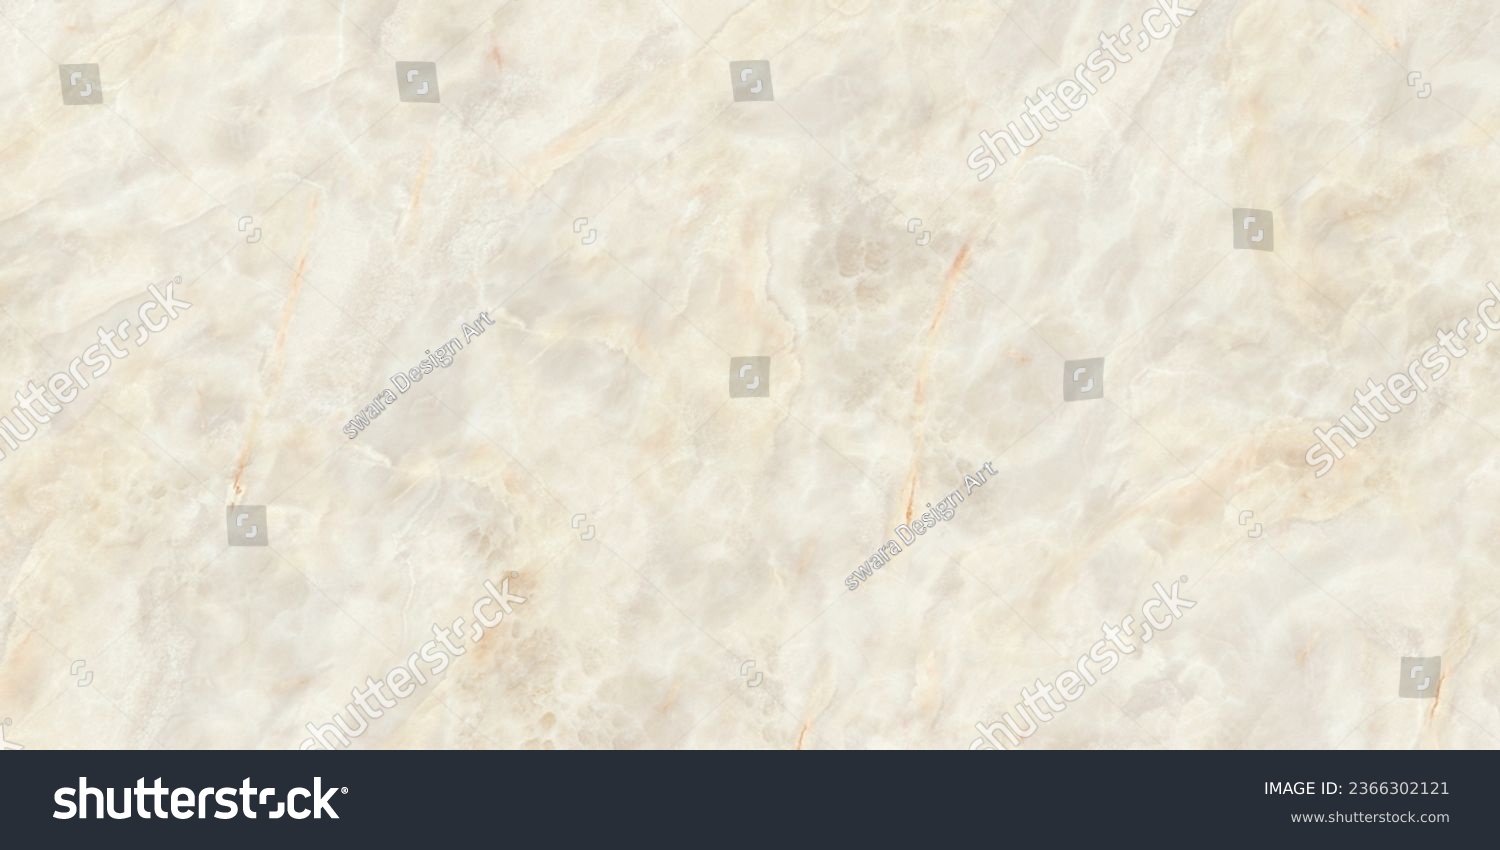 White Marble seamless texture, Neolith Calacatta Luxe, Calacatta Marble, Marble Trend Statuario Gold, Photography Backdrops White Abstract Texture Background Backdrop Marble Wall Tile. #2366302121